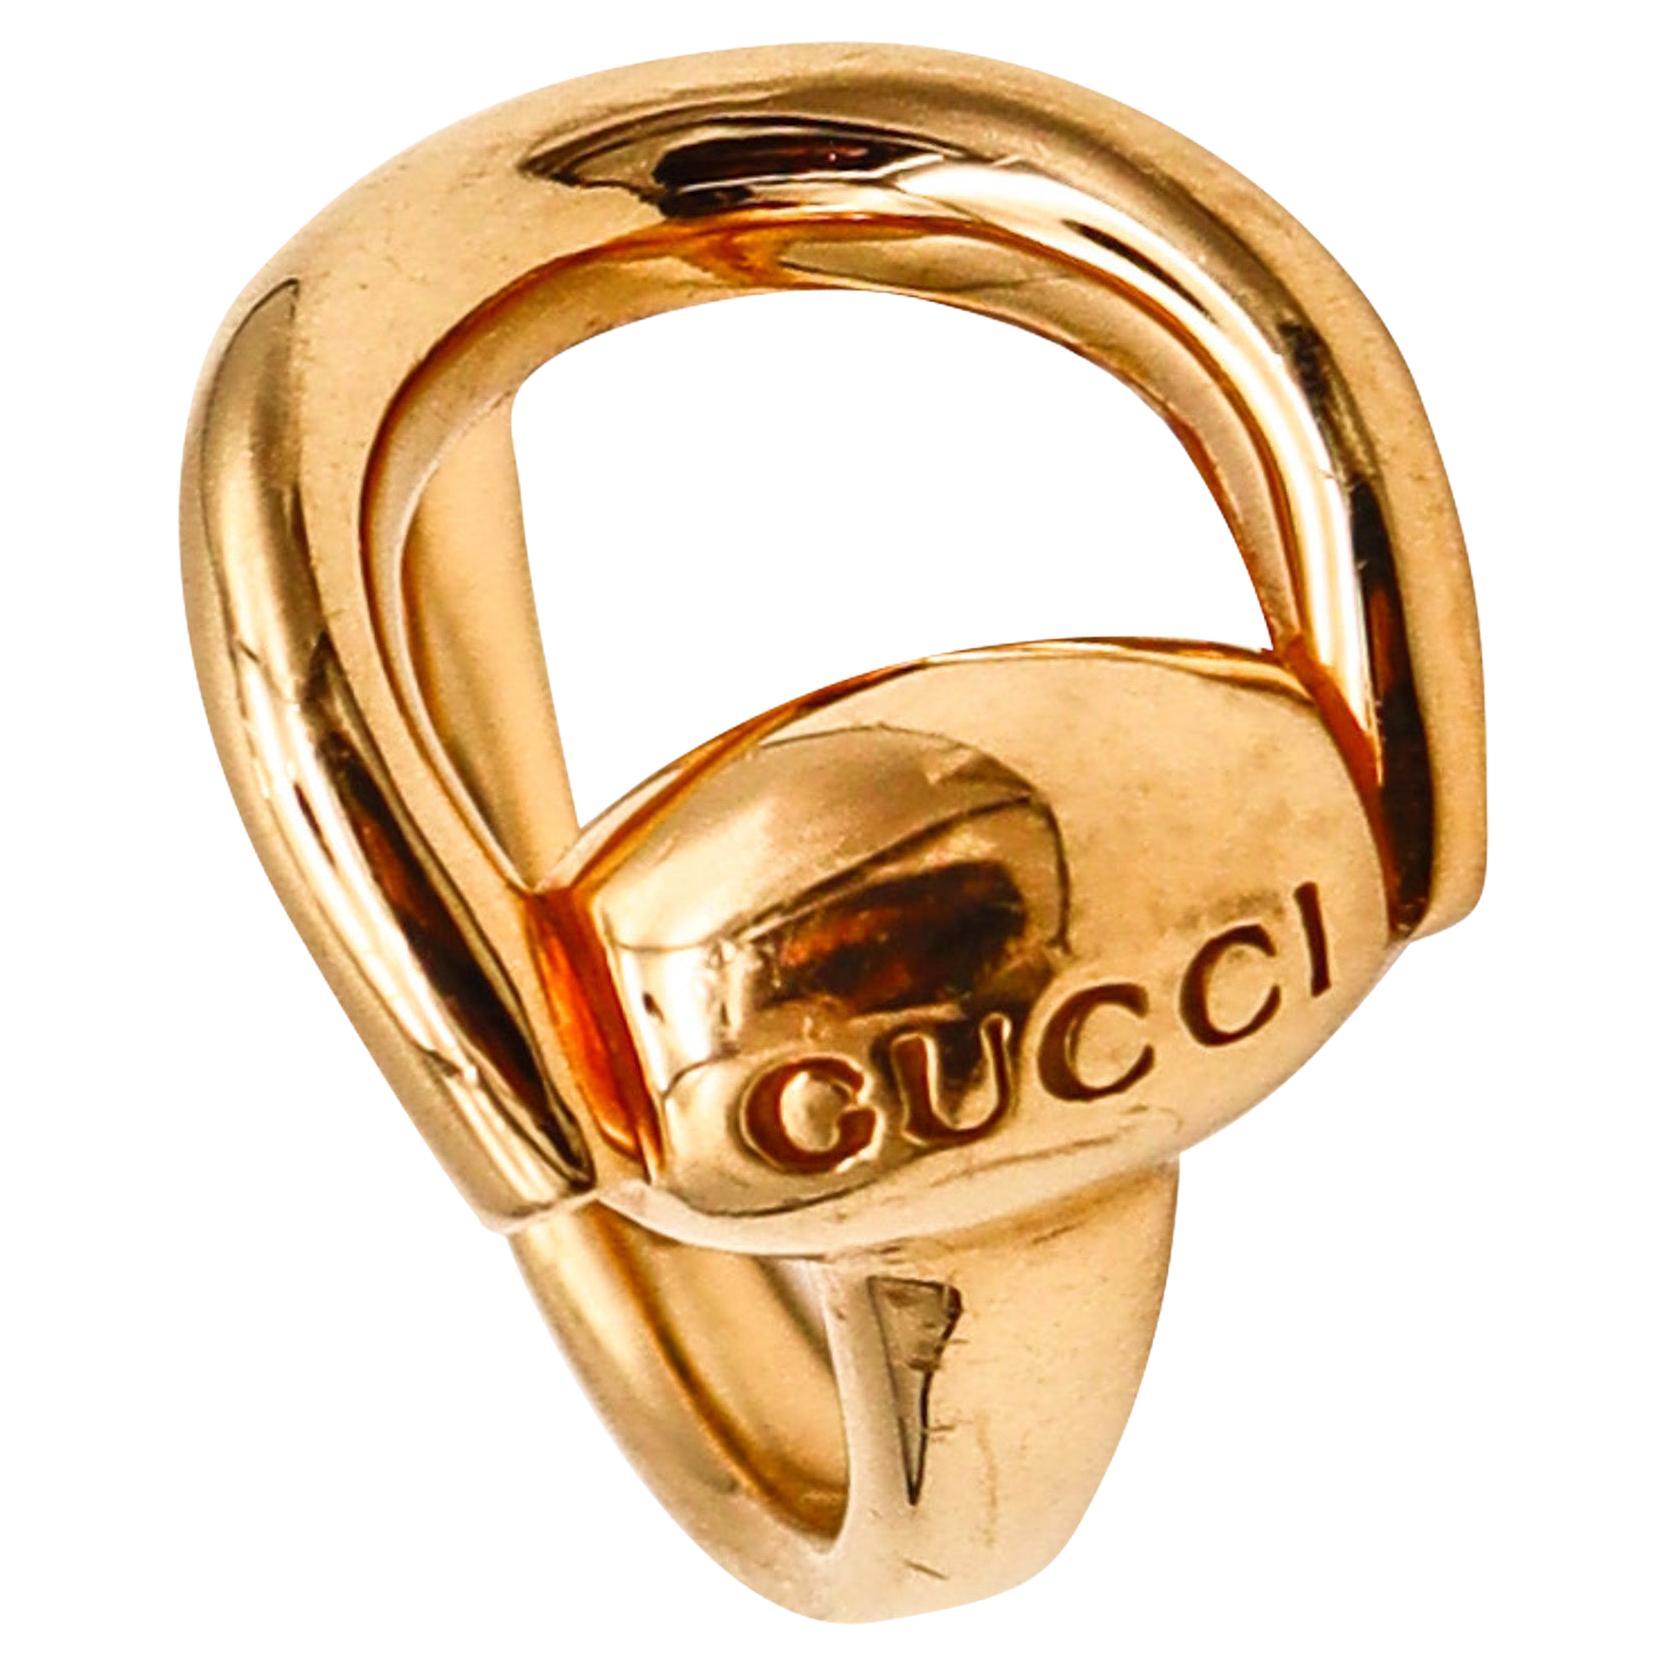 Gucci Milano Horsebit Cocktail Ring in Solid 18kt Yellow Gold